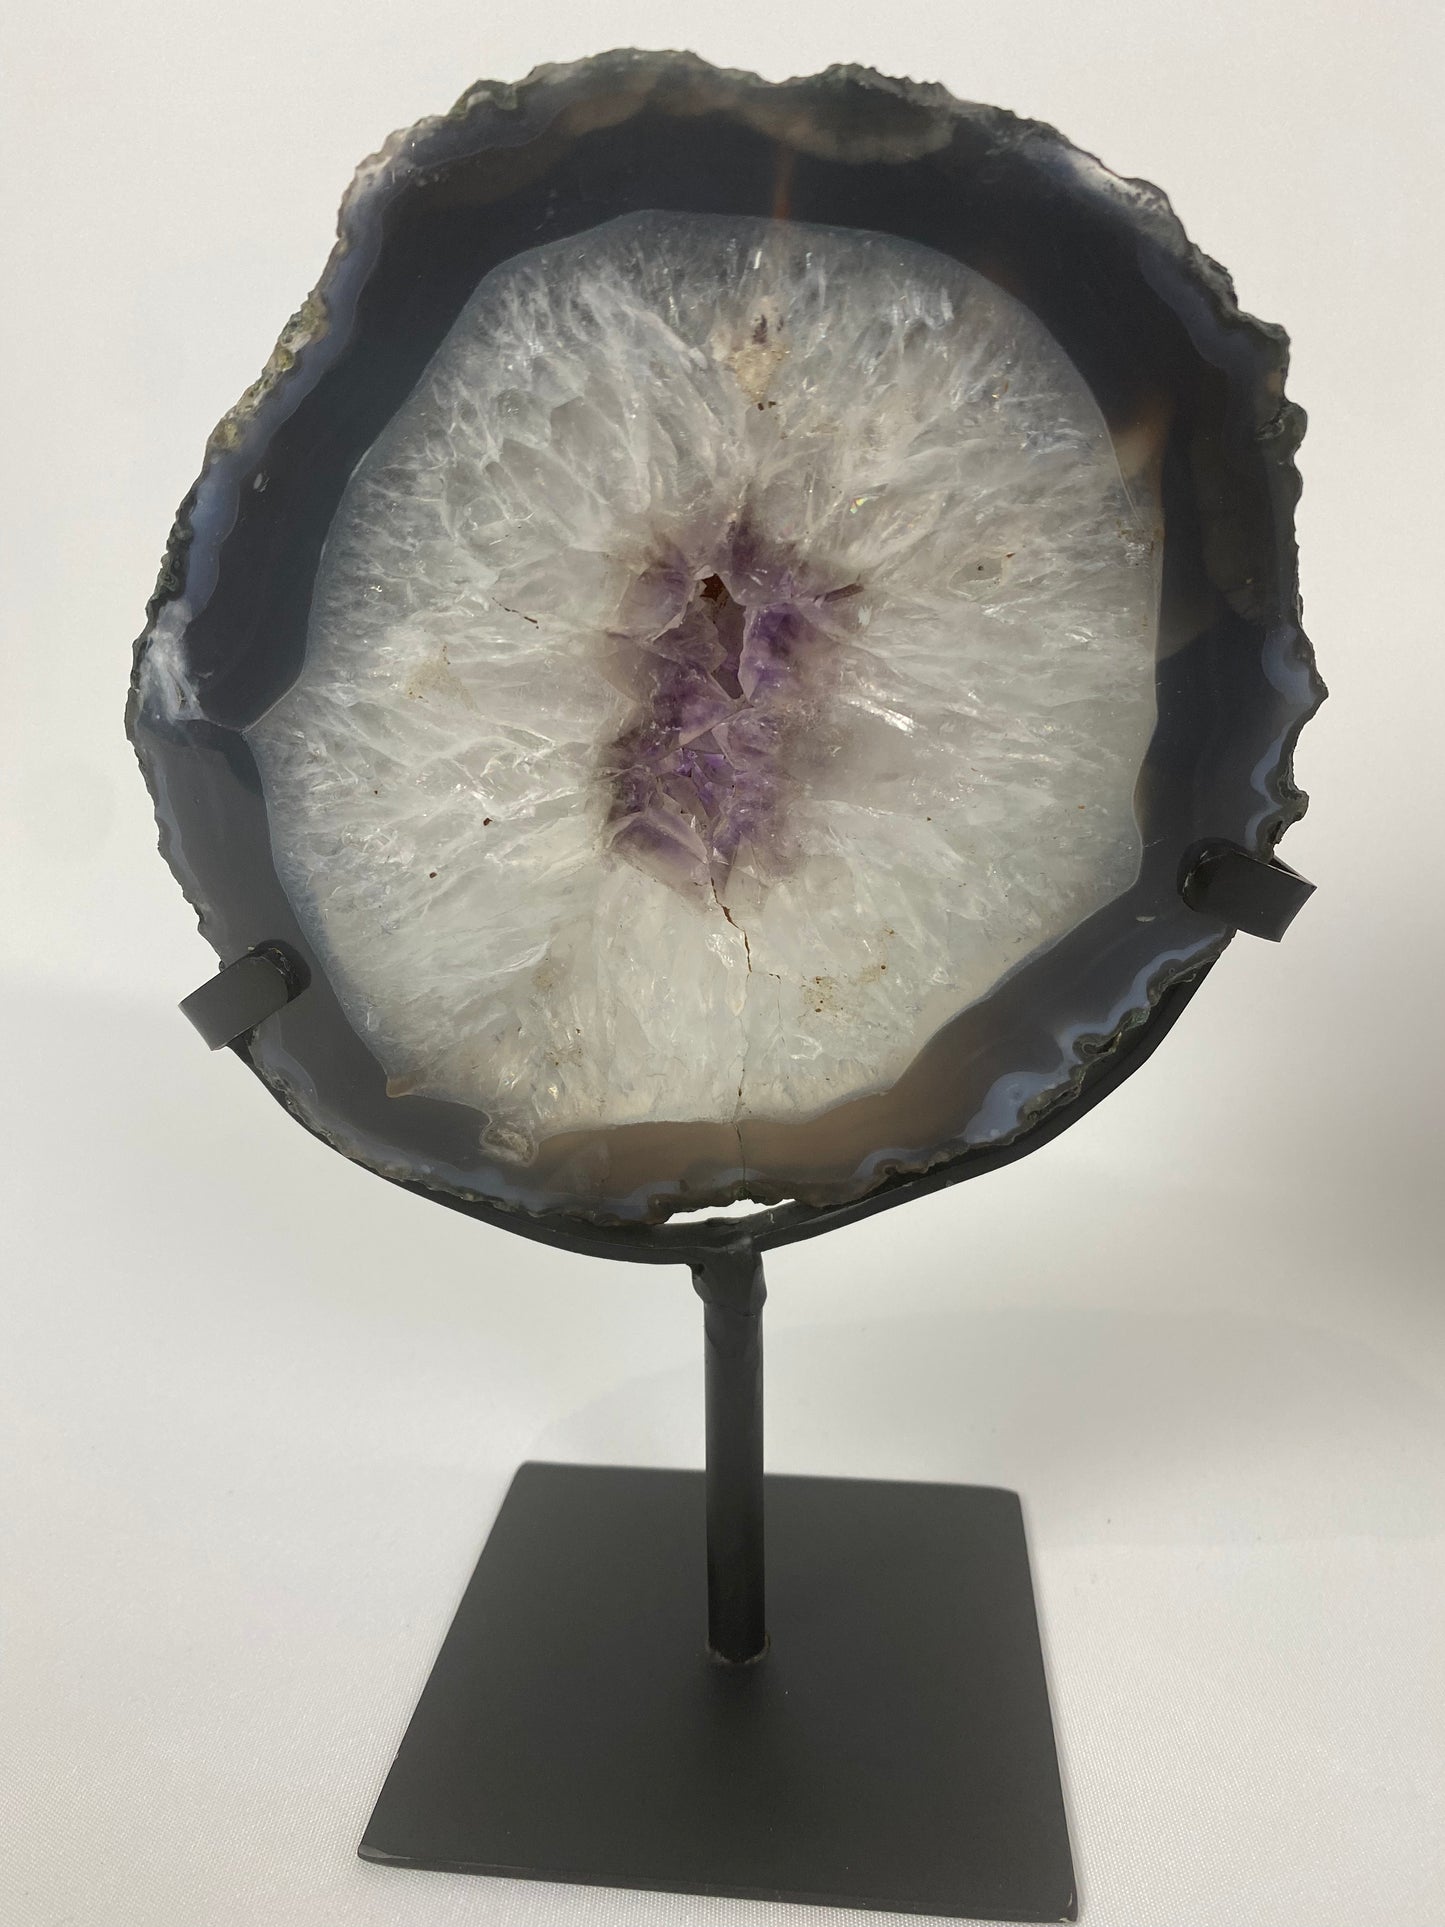 Amethyst Agate on stand